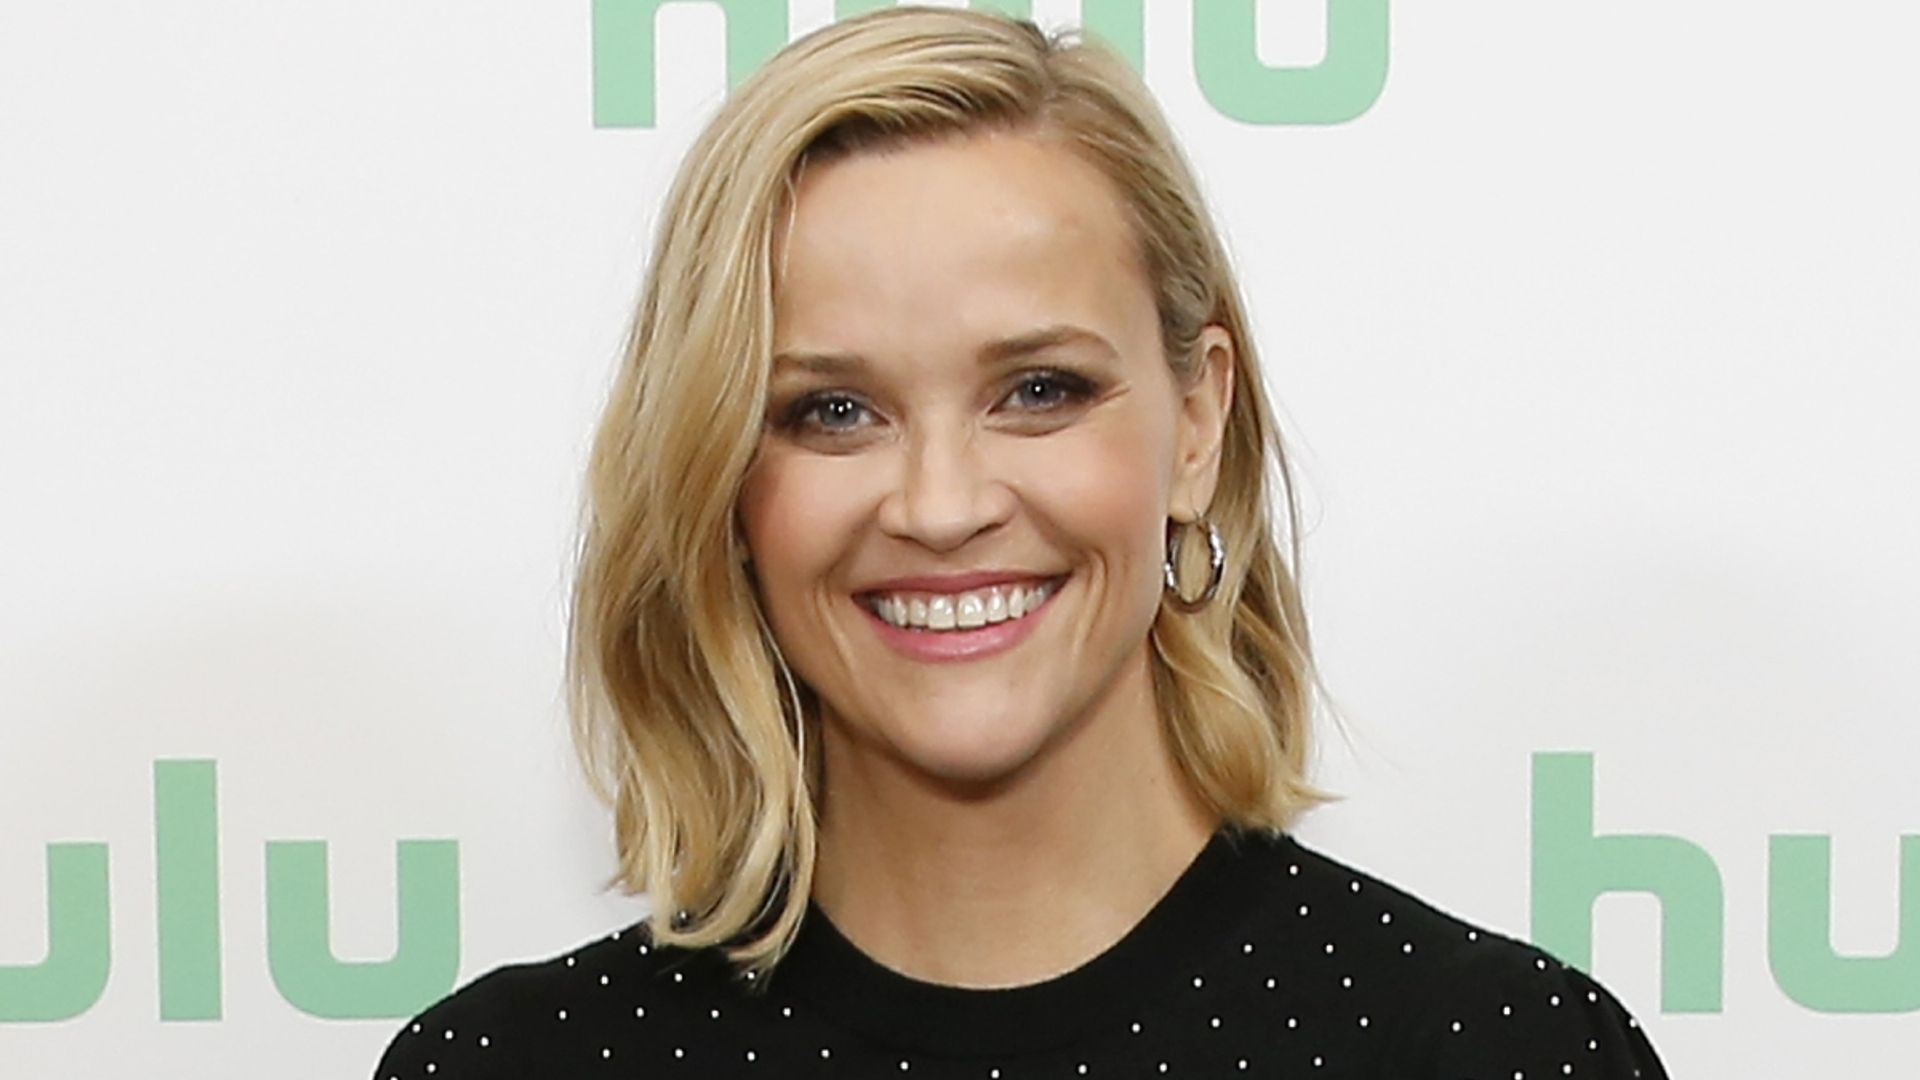 Reese Witherspoon reveals hilarious fashion faux pas - and Mindy Kaling can relate